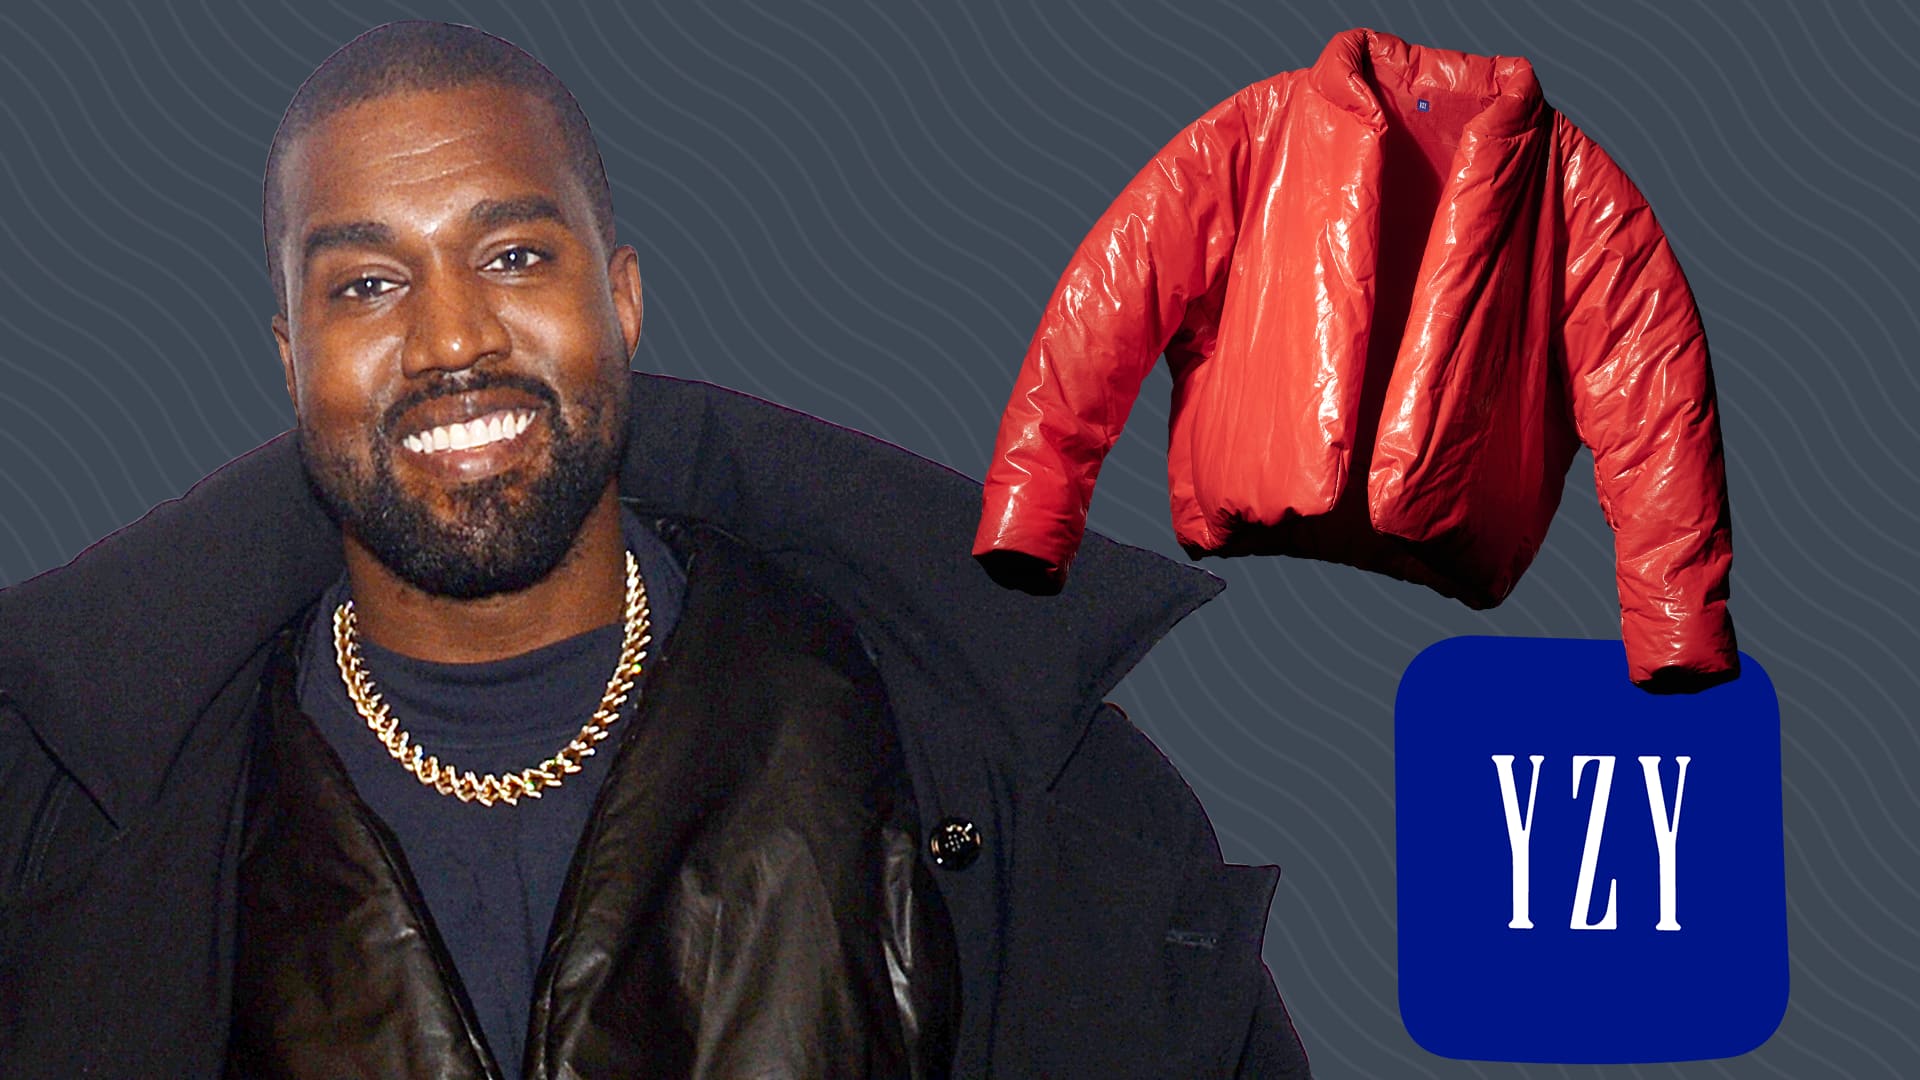 Why Kanye West's Yeezy could save the Gap